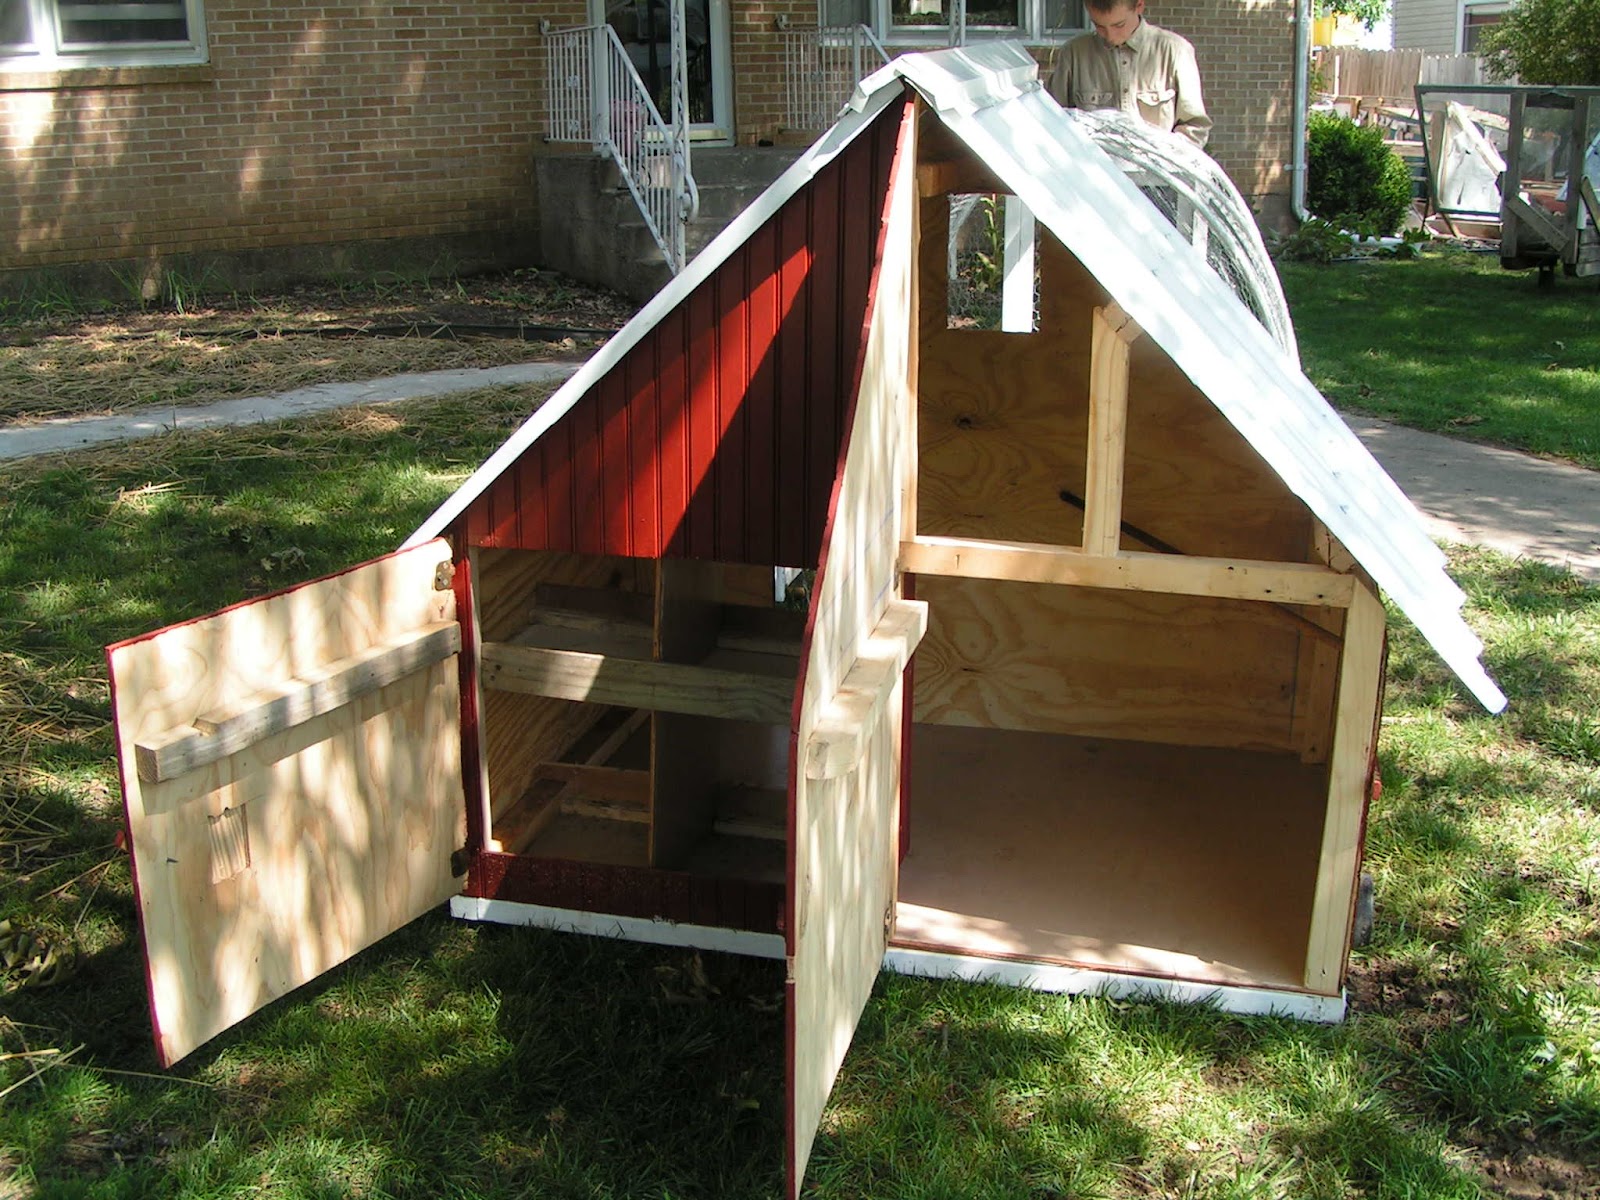 Frugal Home and Health: Chicken Tractors and more